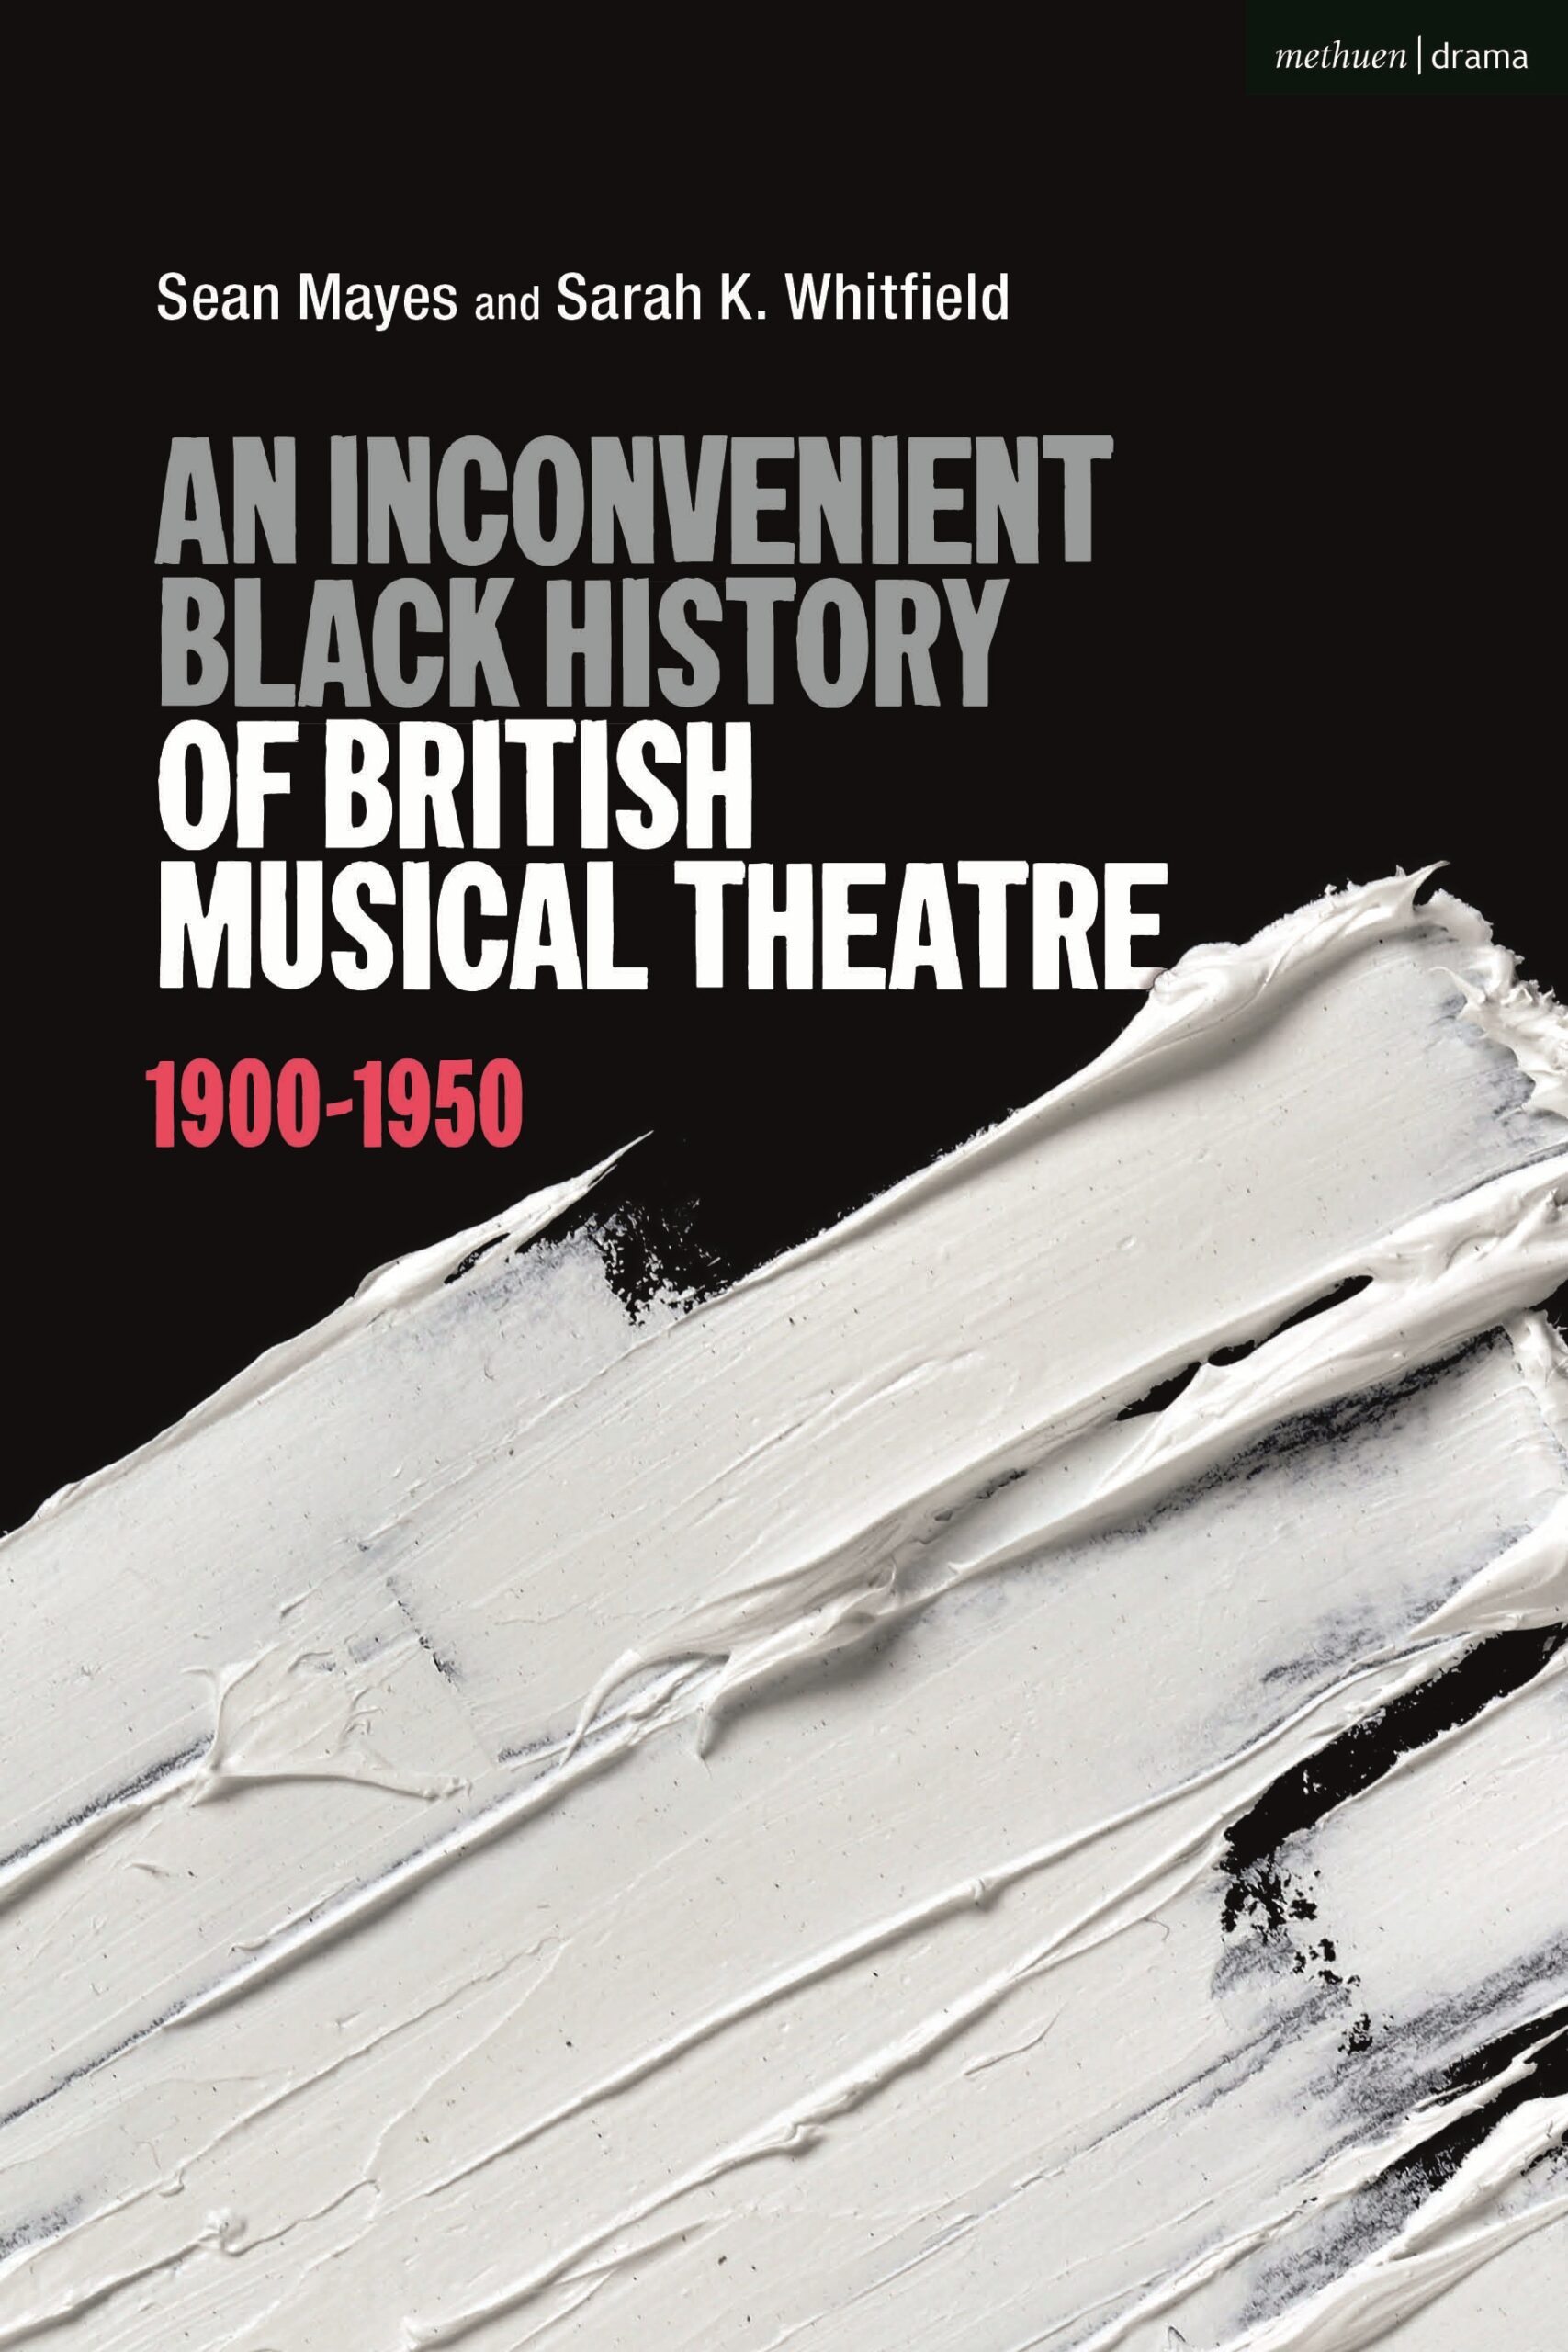 "An Inconvenient Black History of British Musical Theatre (1900-1950)"